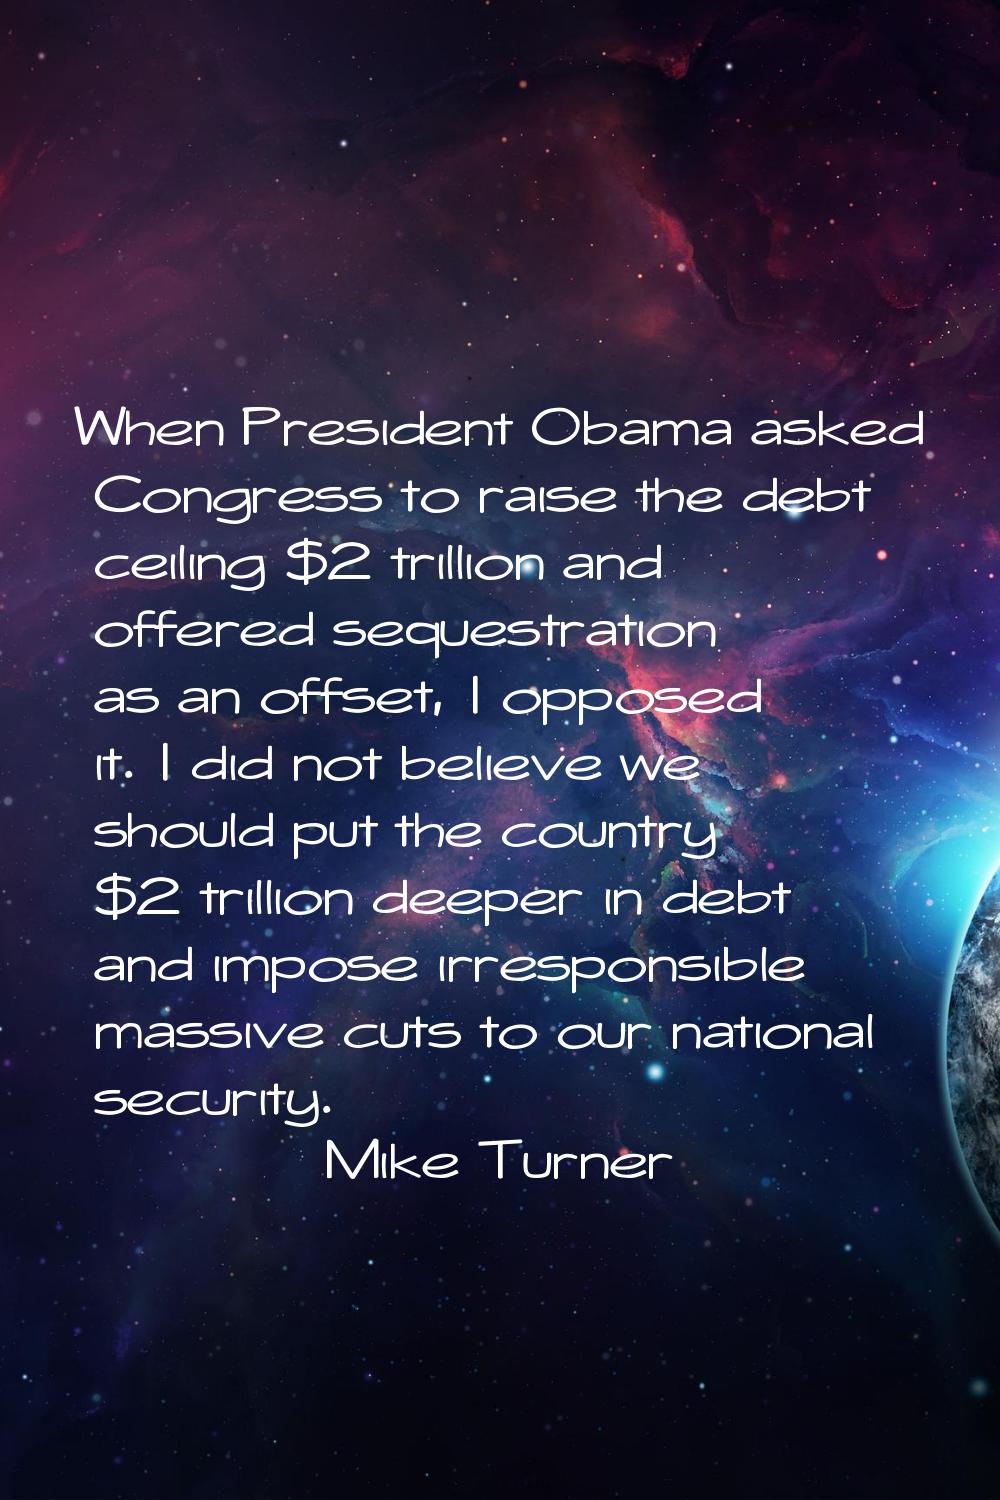 When President Obama asked Congress to raise the debt ceiling $2 trillion and offered sequestration